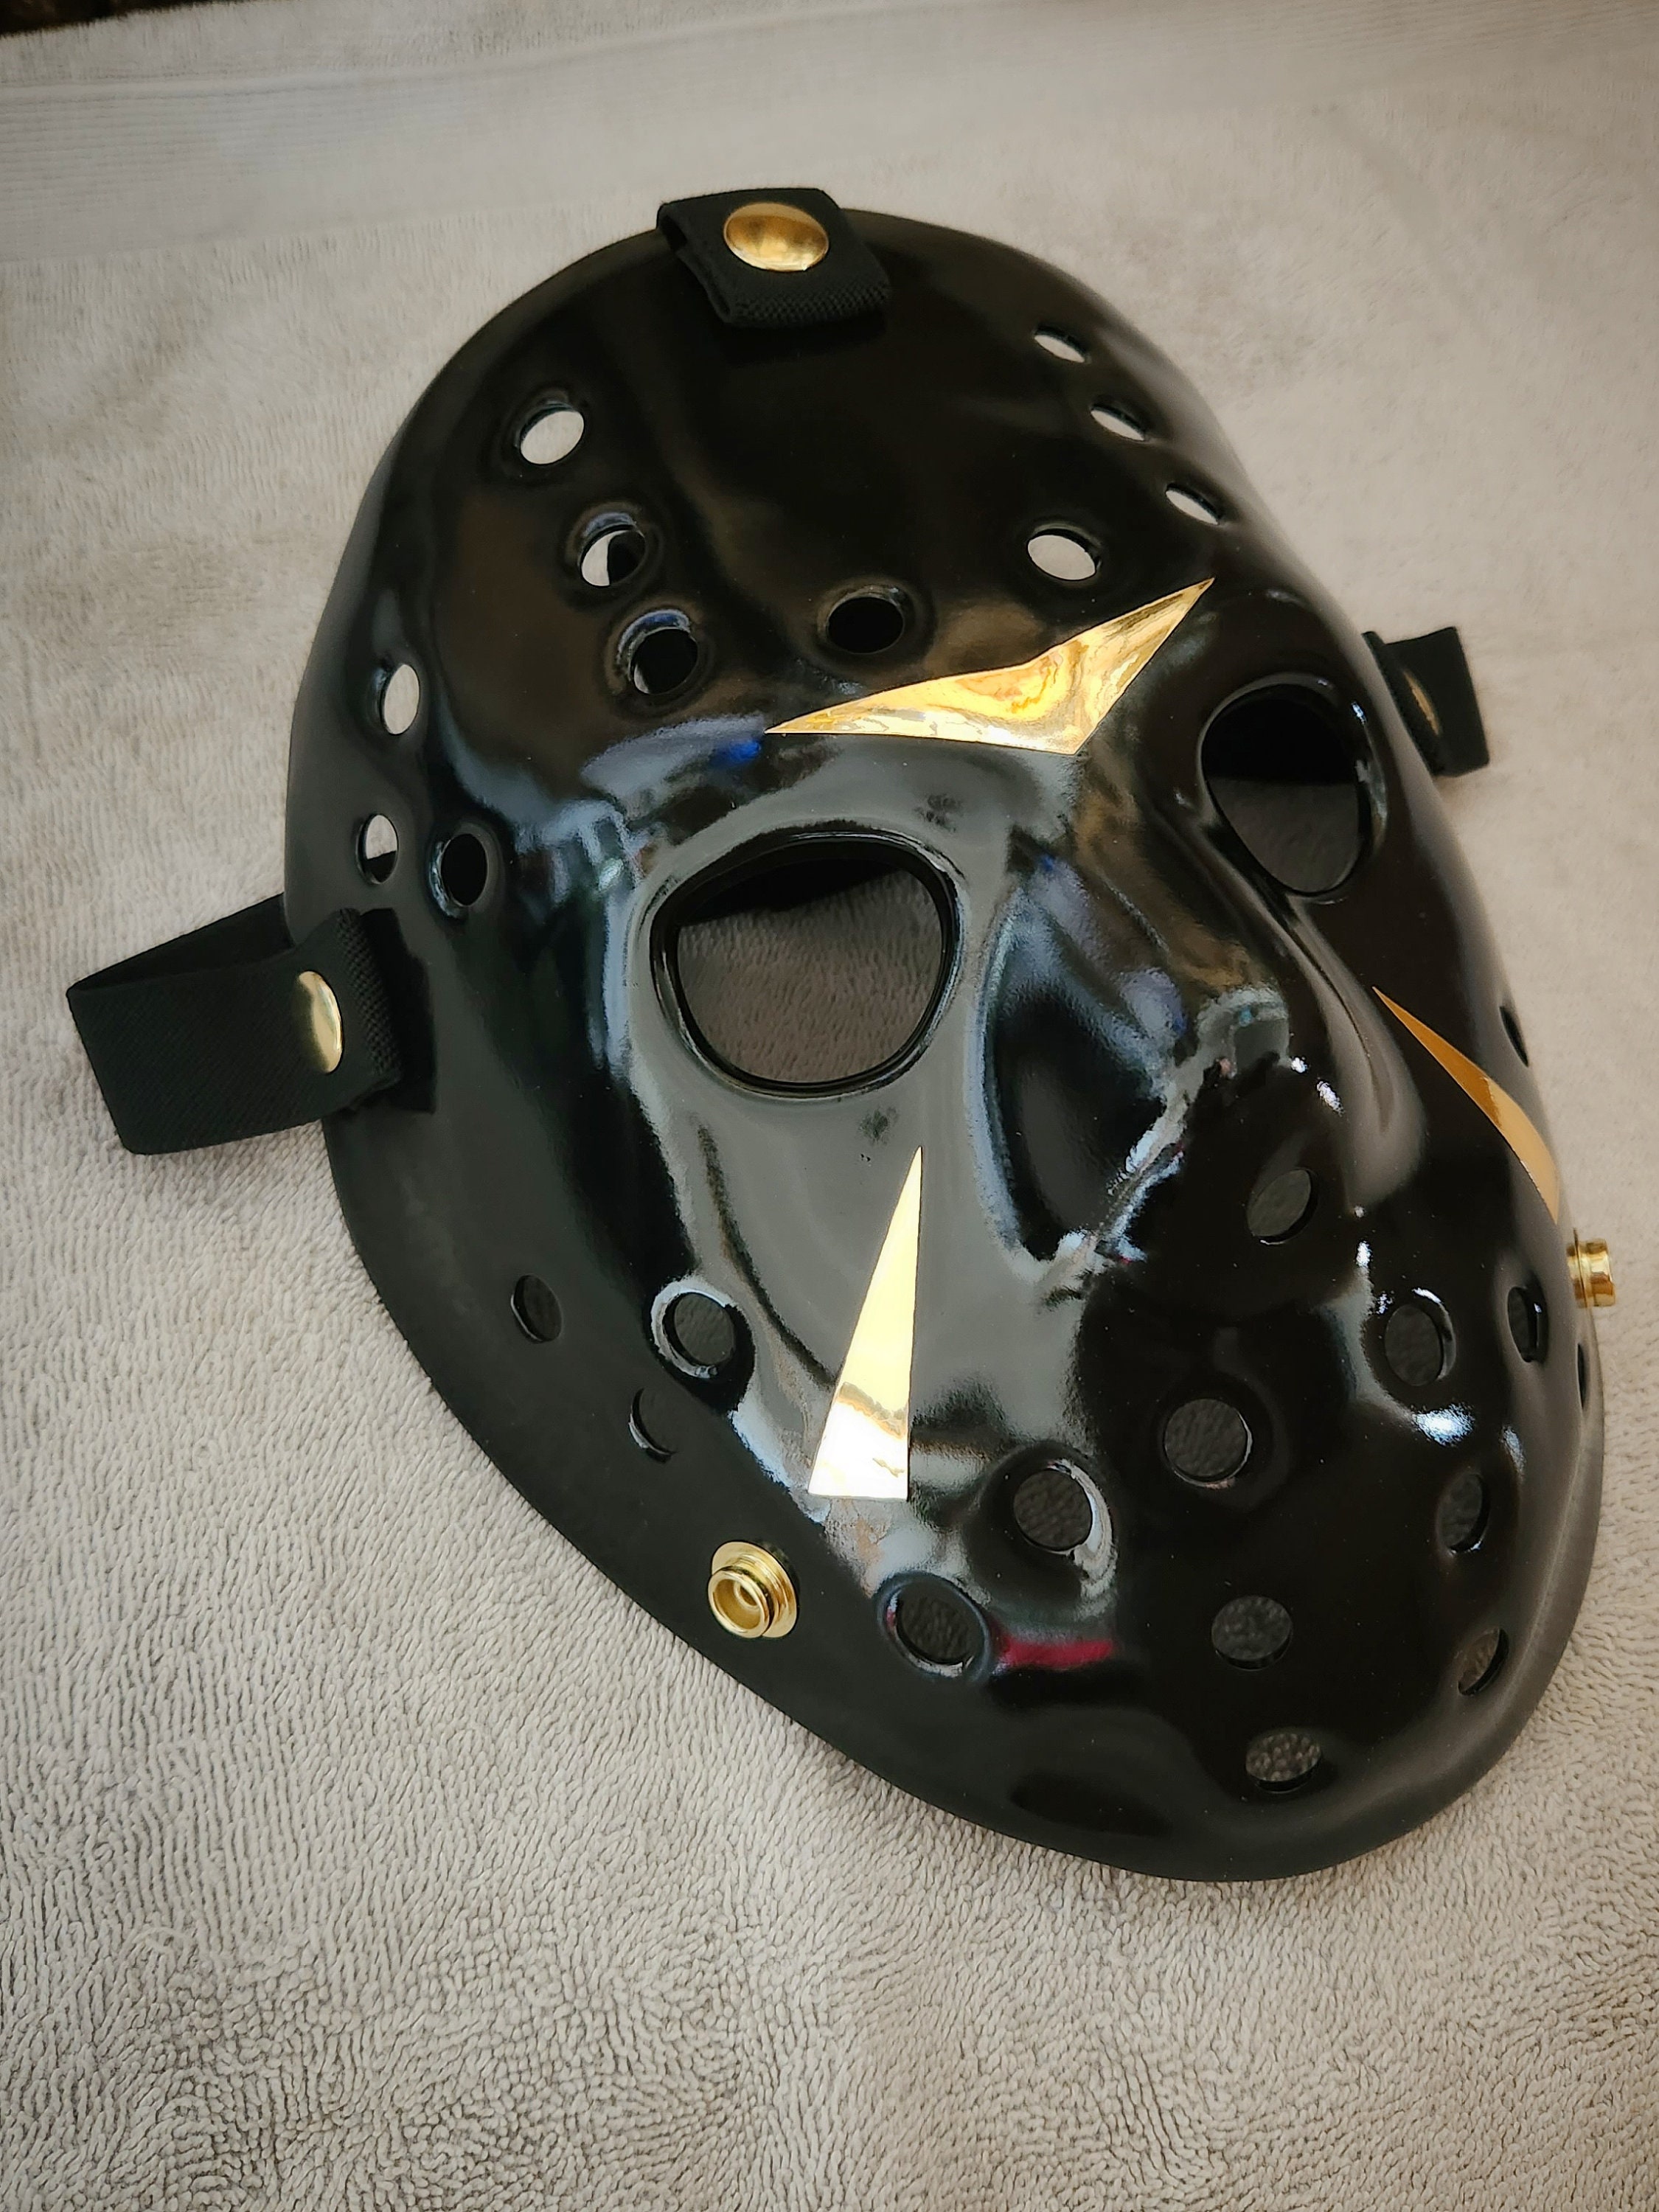 Quick nabs gold for the U.S. with mask design —